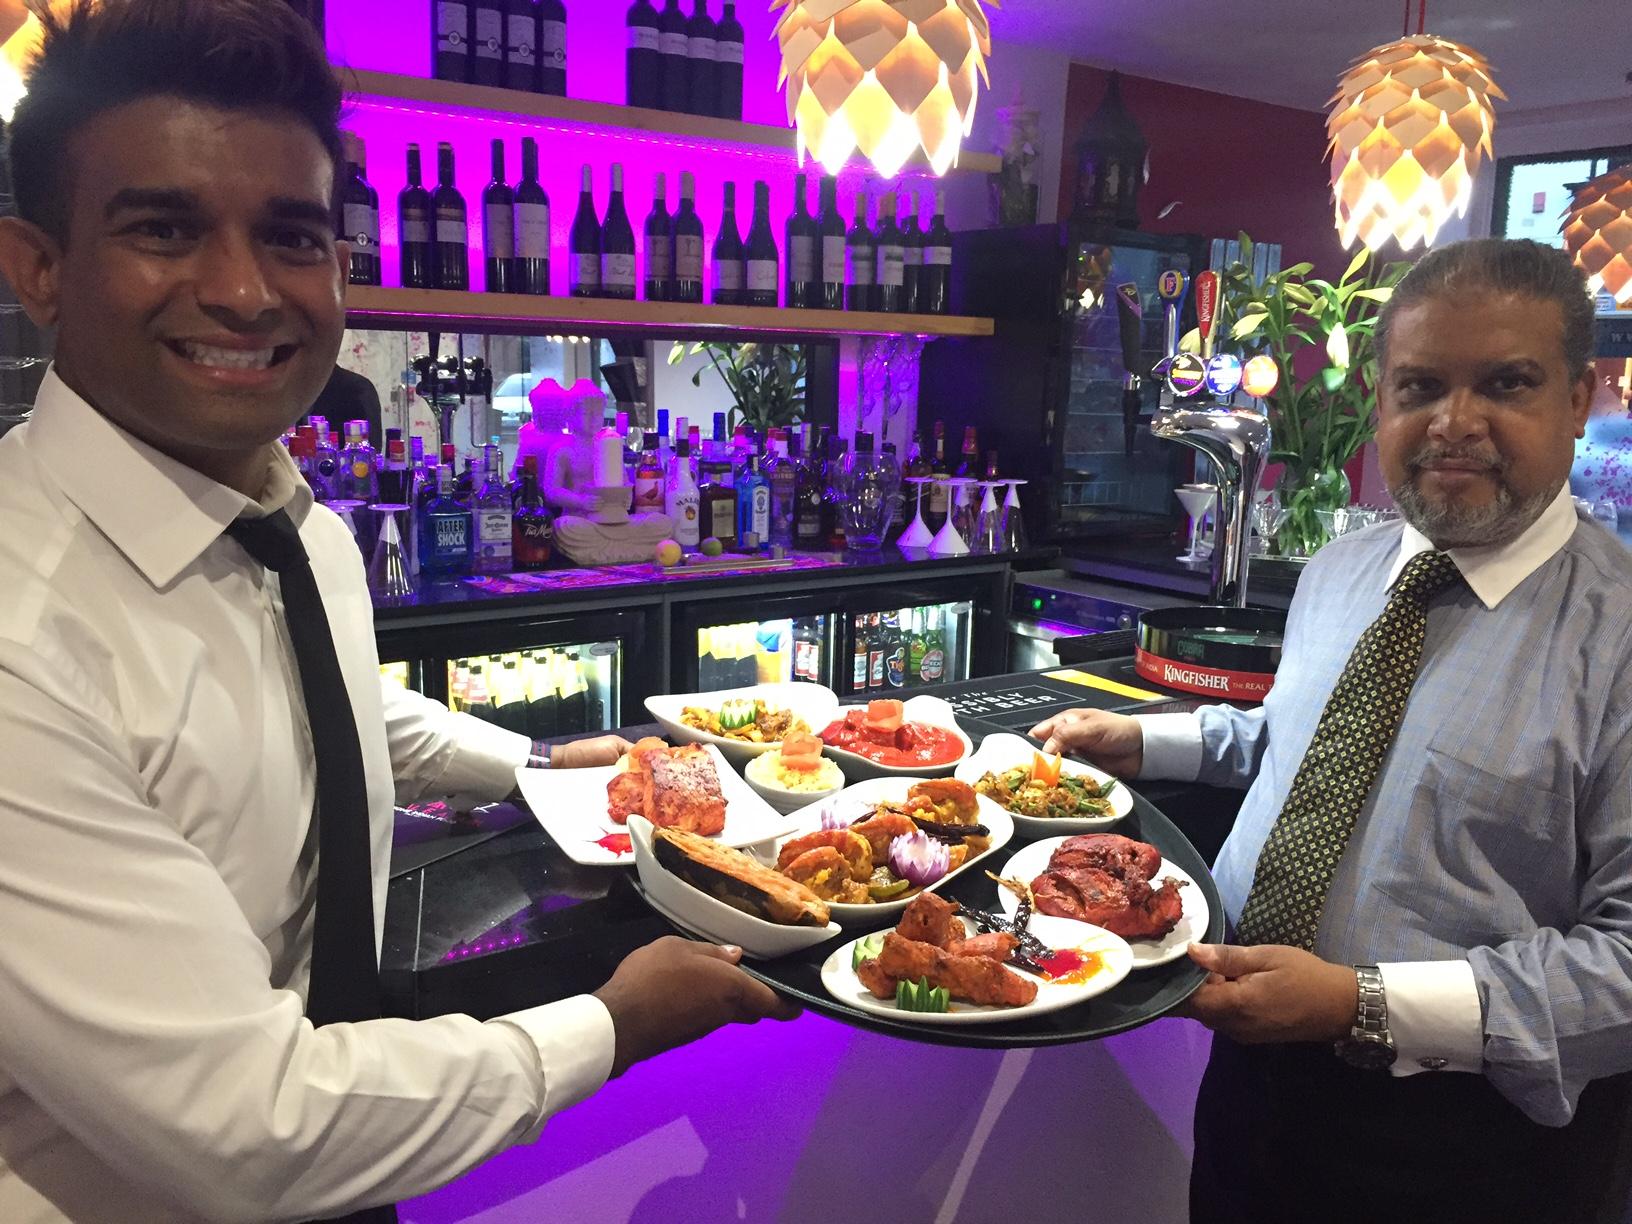 Sujat Sheikh, right, and his son at their restaurant called Mogul E Azam in Nottingham, England.